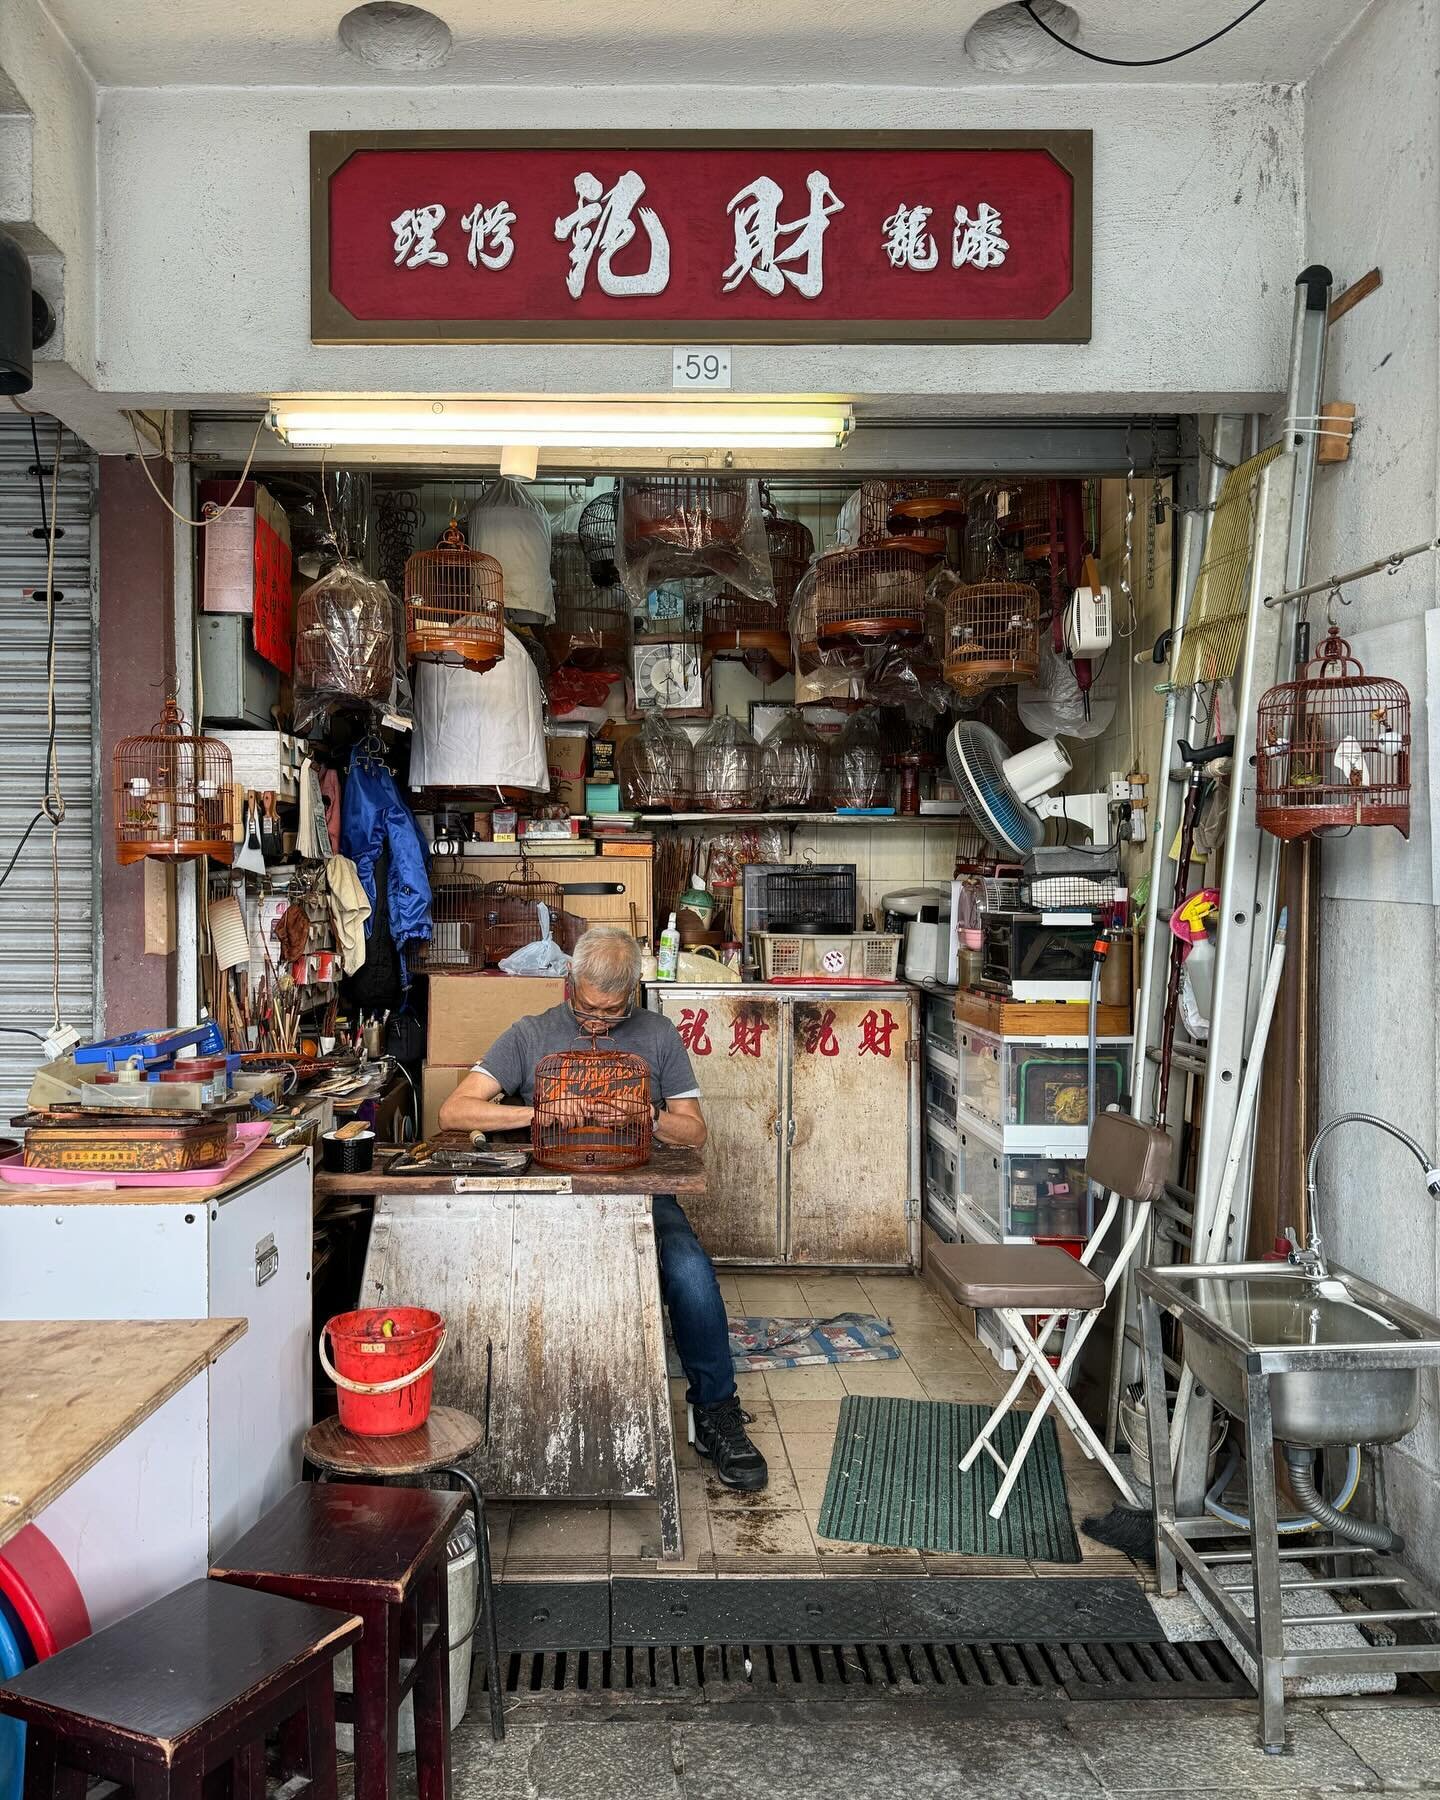 A visit to雀仔街 in Mong Kok to meet birdcage-making master Chan Lok Choi and @kwokdylan provided a lot of fun. Conversations around knowledge transfer, bird keeping demographics, history and memories of the old/current bird street, the threats from pro